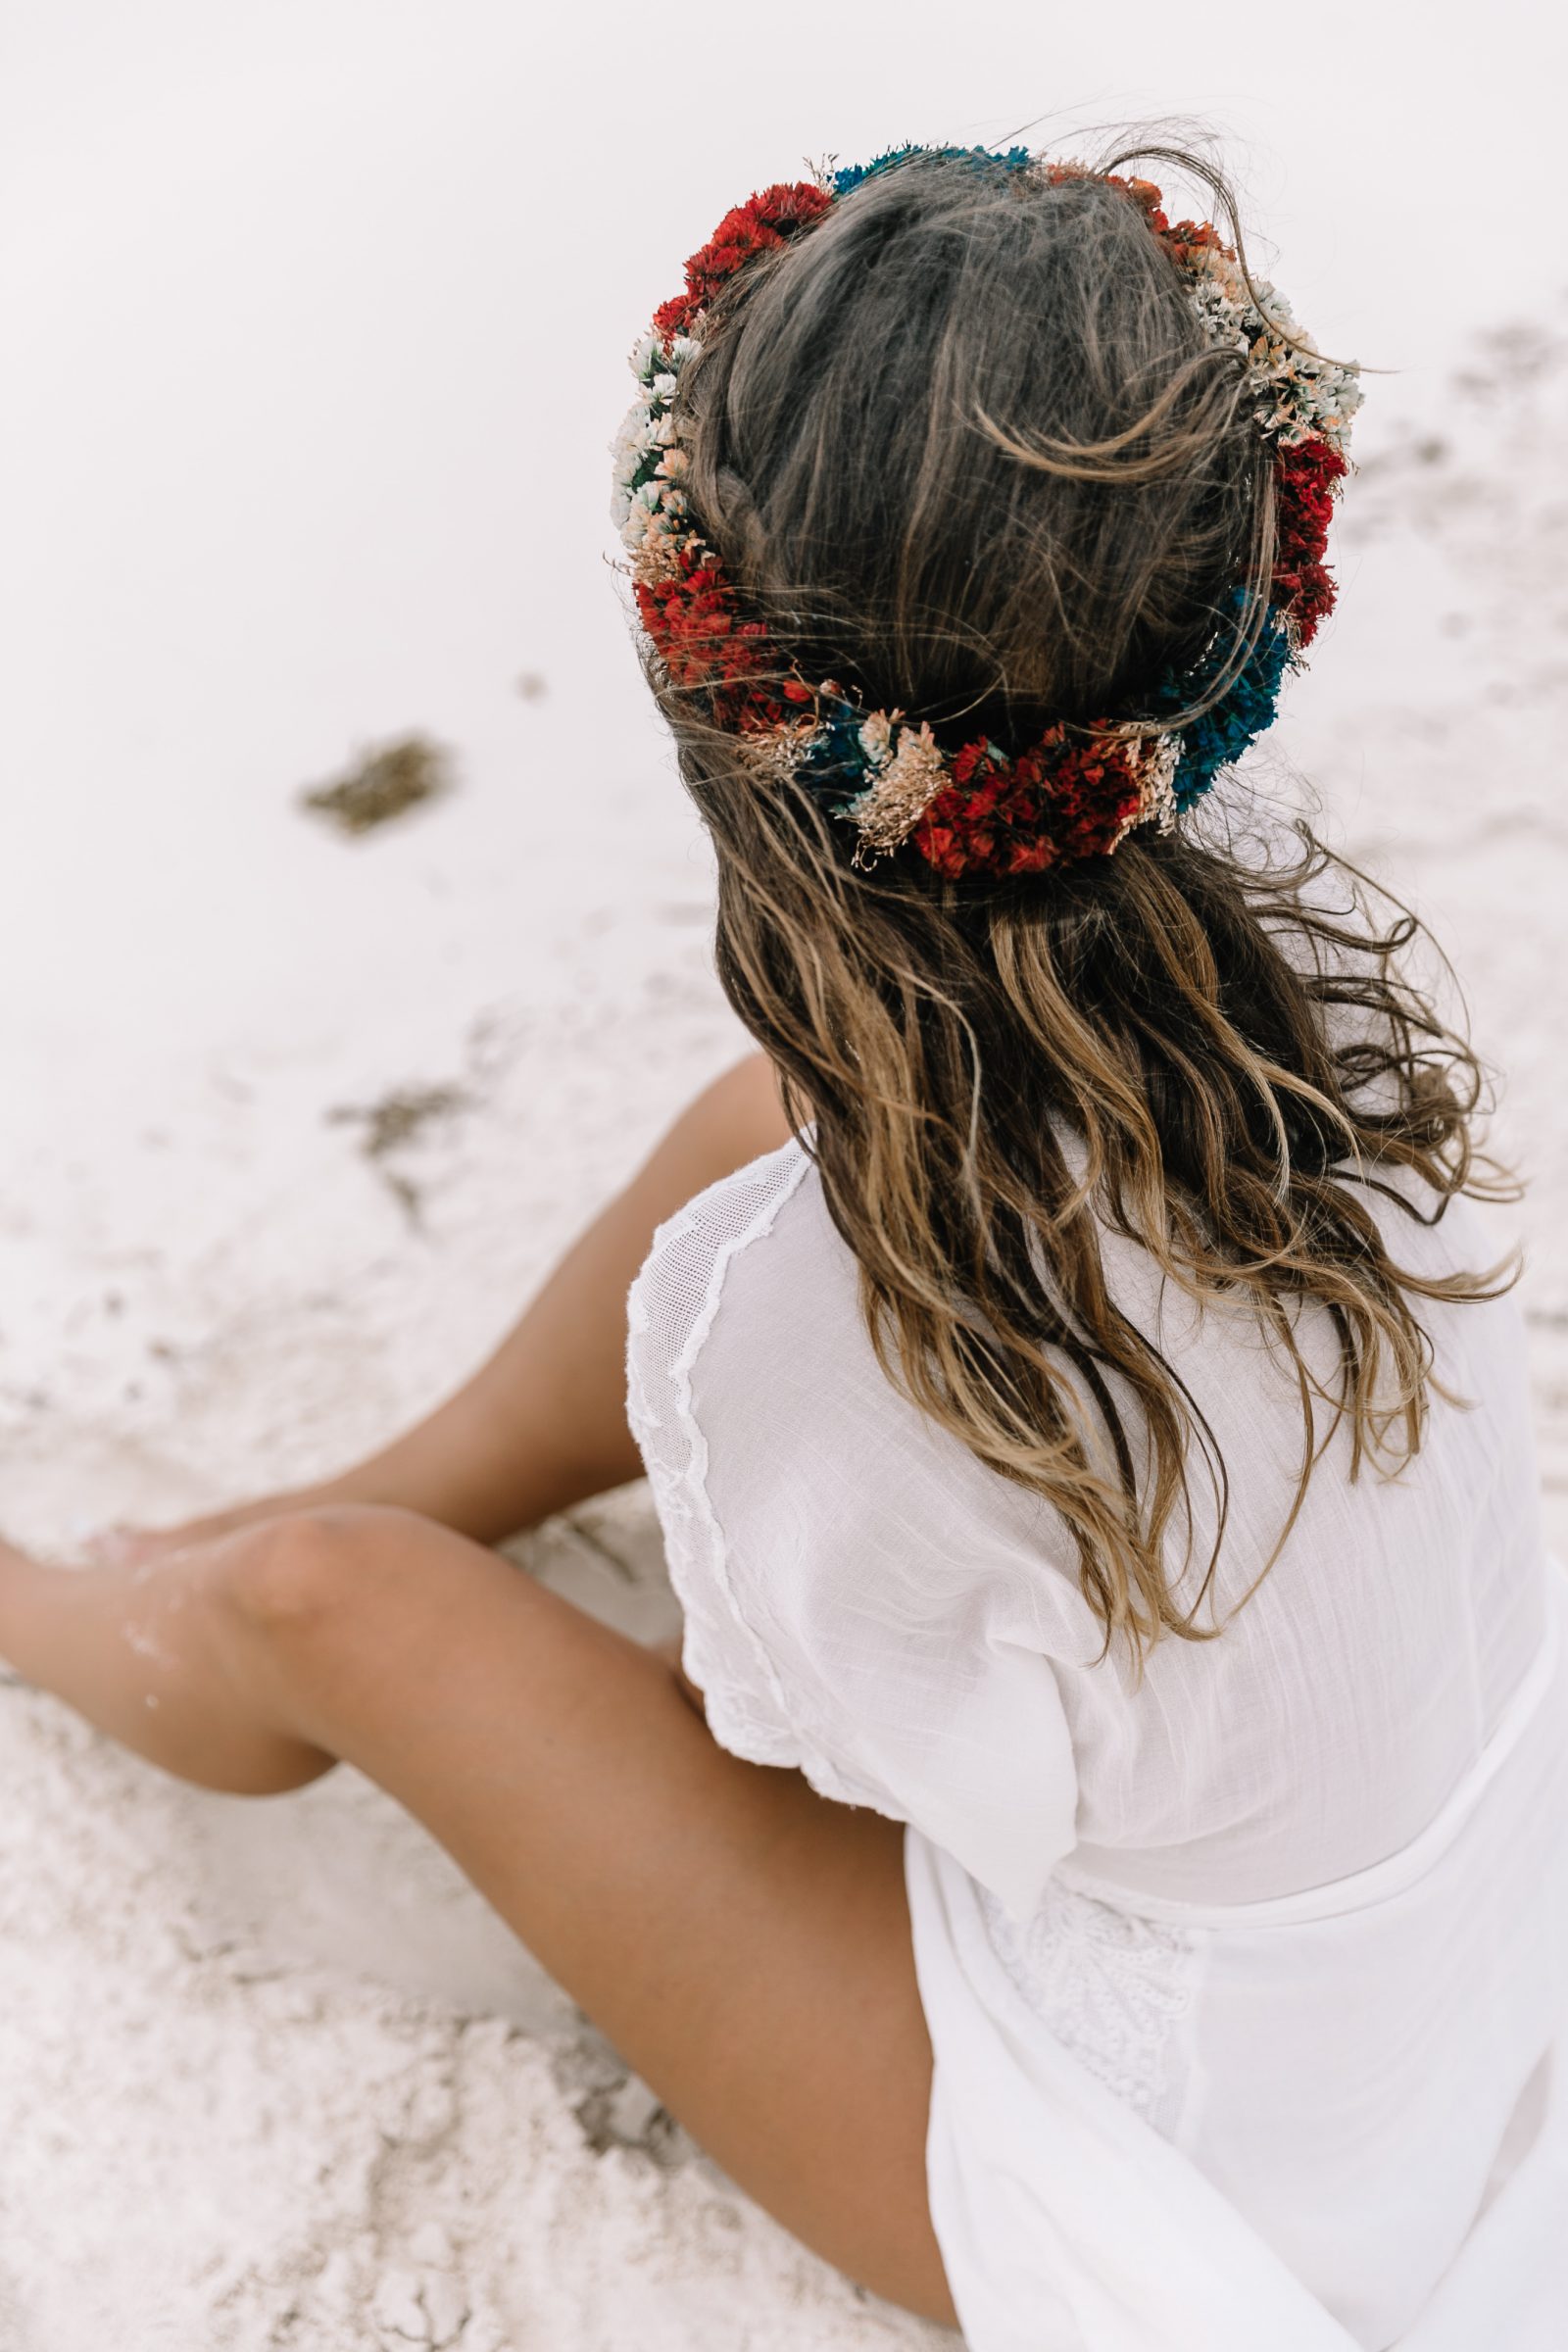 white_long_dress-boho_style-tulum_mexico-beach-floral_crown-outfit-collage_vintage-48